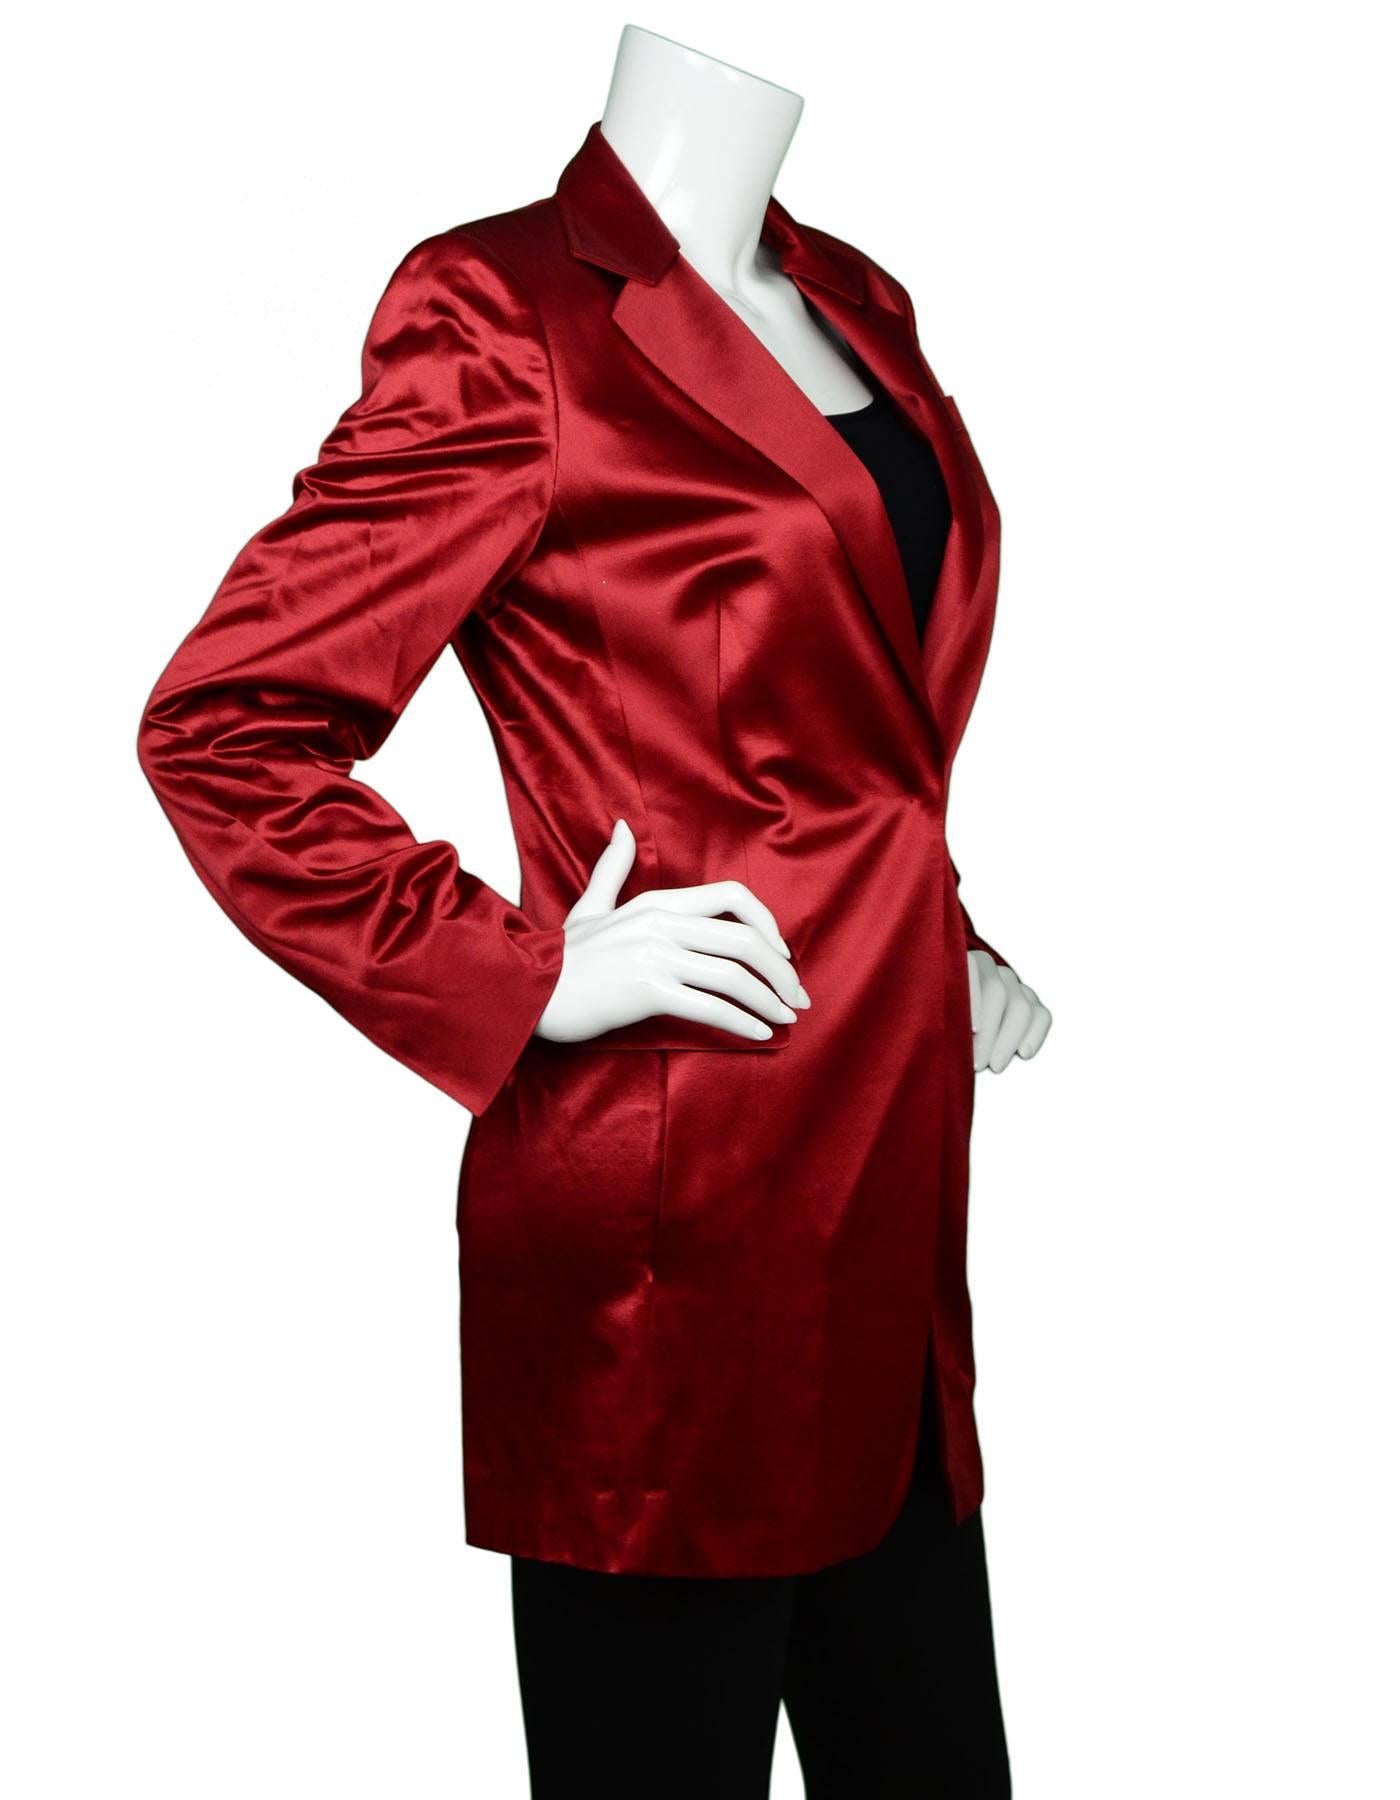 Akris Red Satin Blazer  

Made In: Switzerland
Color: Rust/Burgundy
Composition: 68% wool, 25% silk, 7% nylon
Lining: Rust/Burgundy, 100% silk
Closure/Opening: One snap button closure
Exterior Pockets: Two hip flap pockets
Interior Pockets: